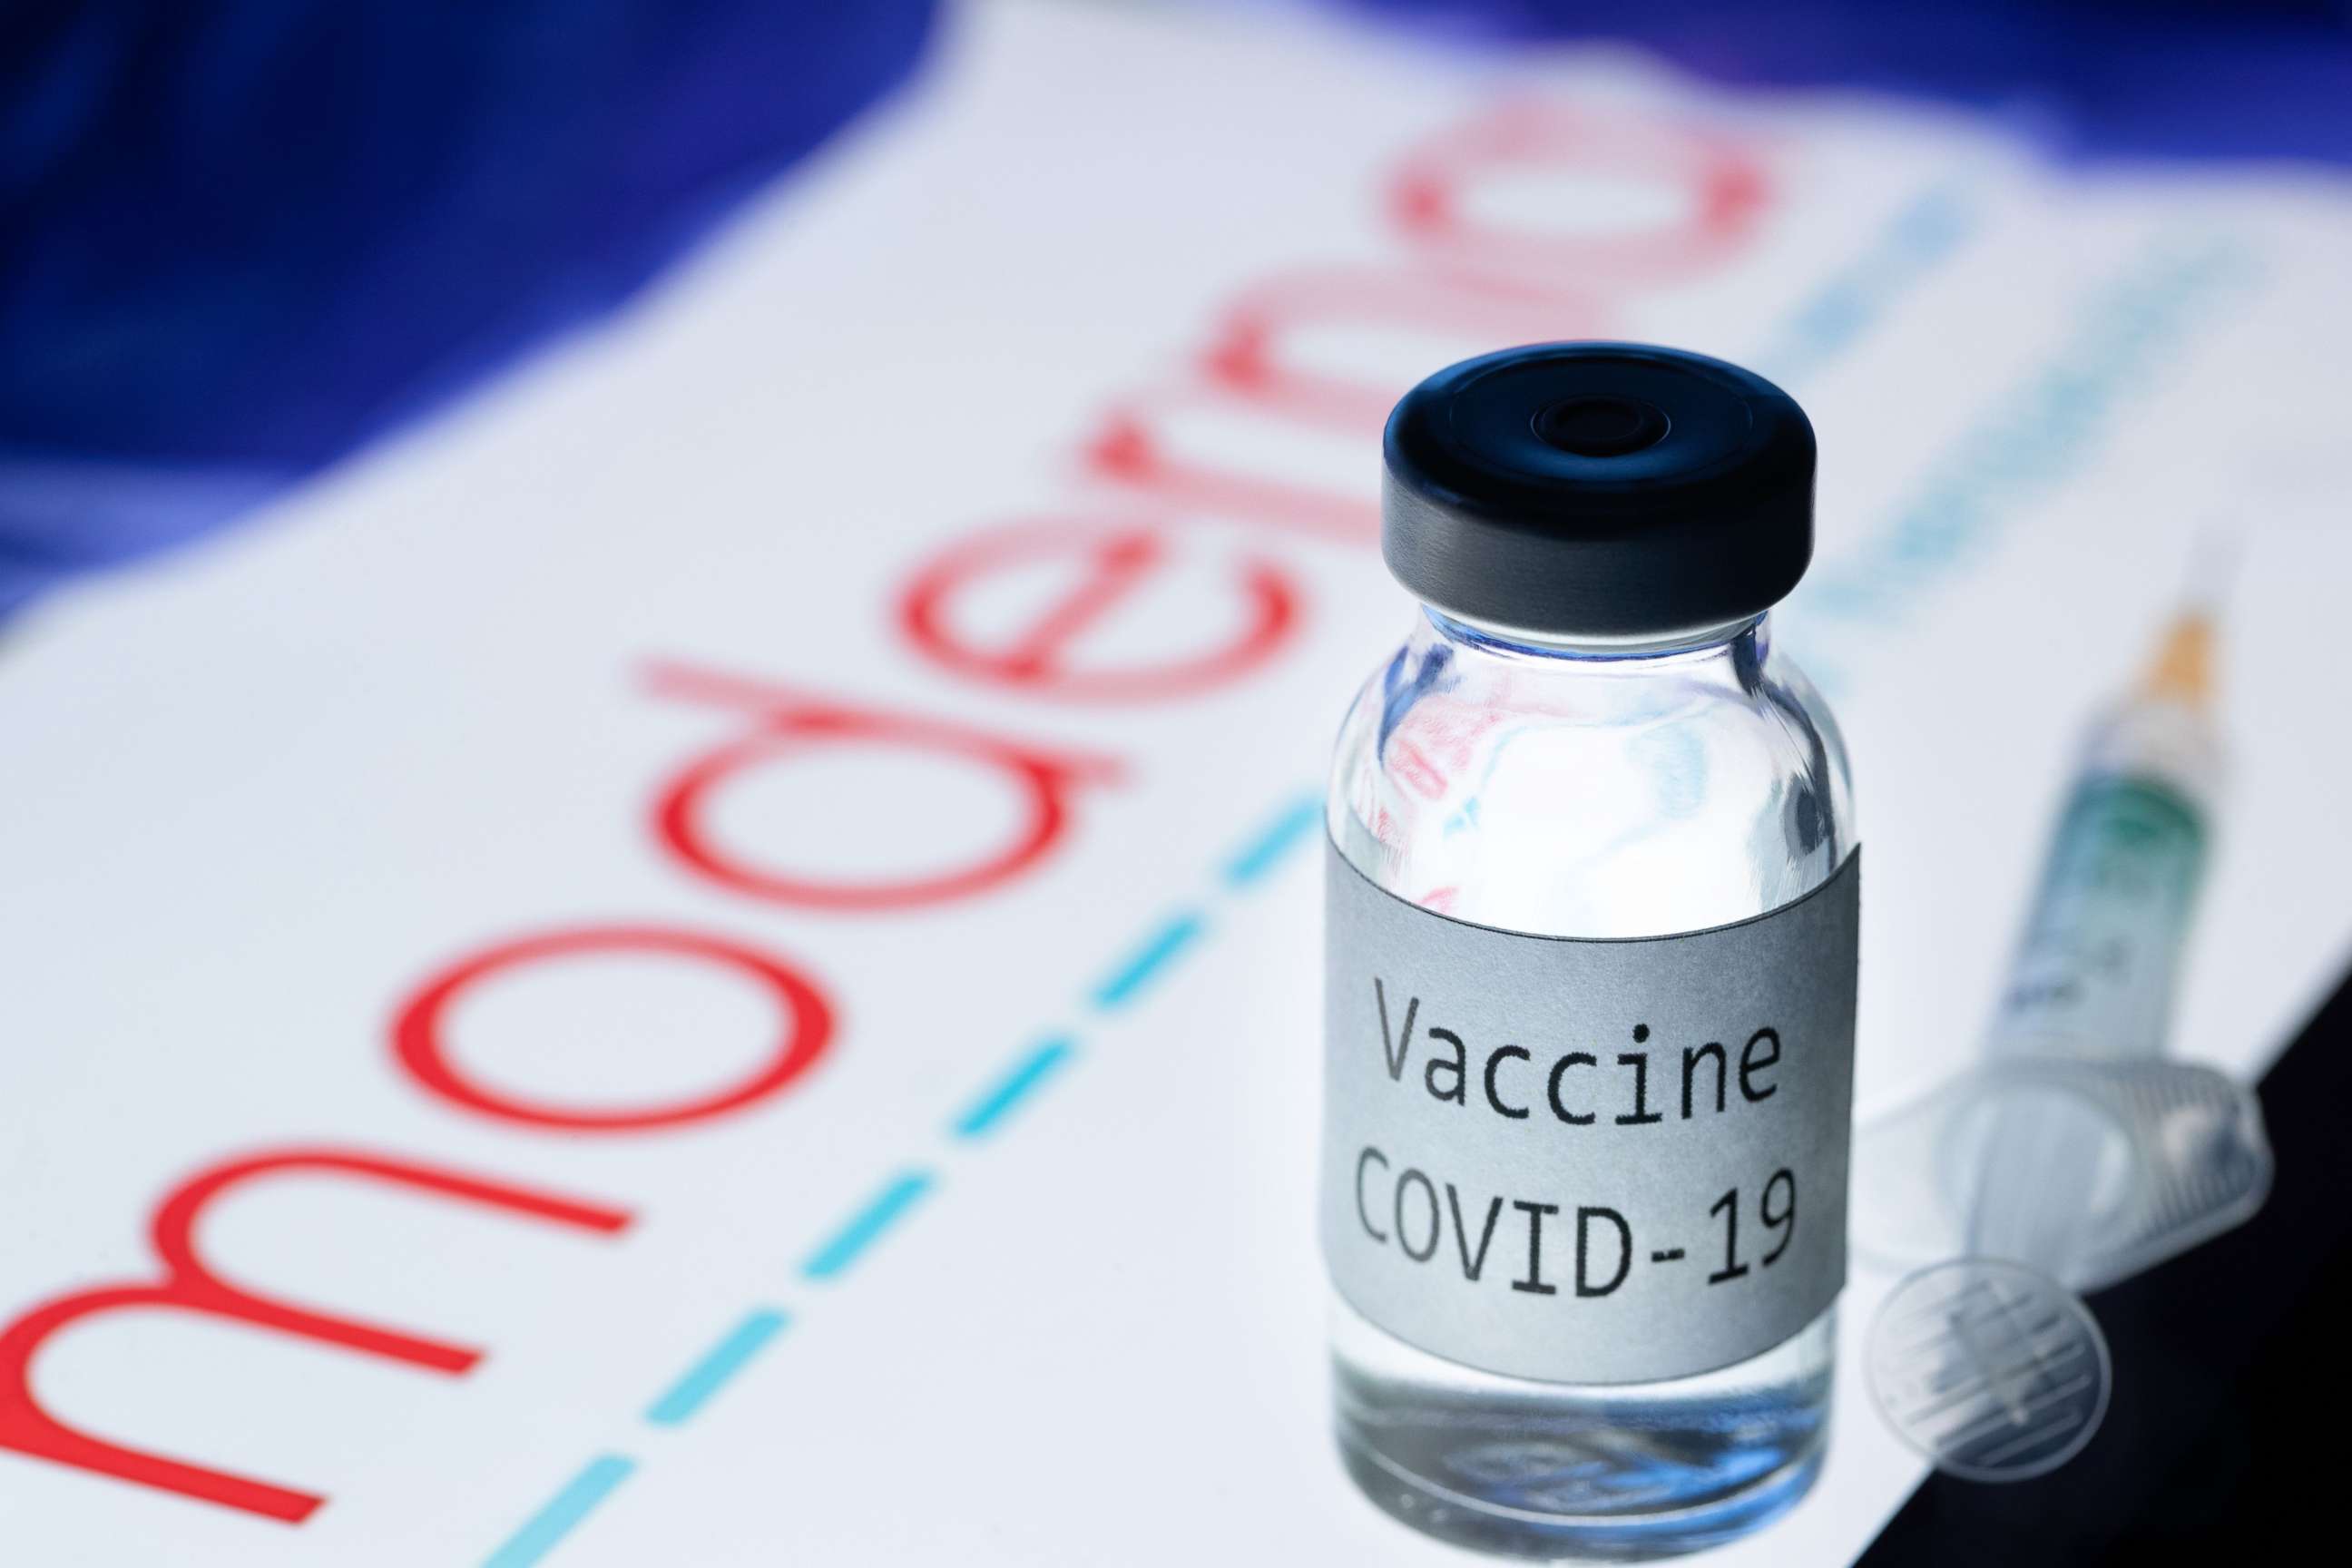 PHOTO: This picture taken on November 18, 2020 shows a syringe and a bottle reading "Vaccine Covid-19" next to the Moderna biotech company logo.